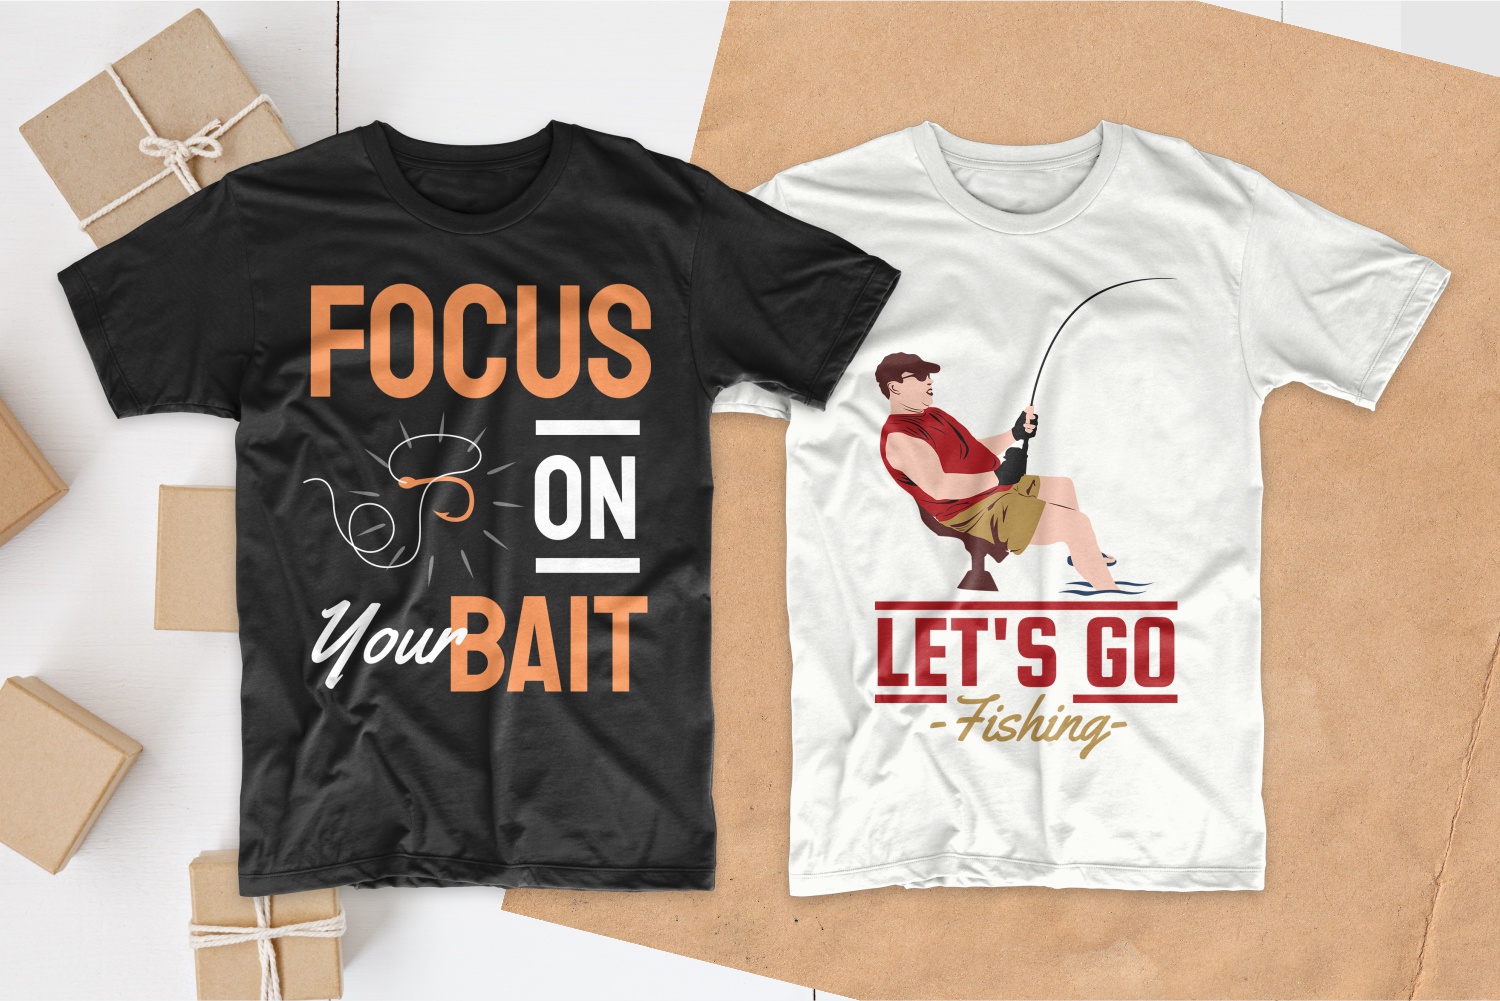 White and black T-shirts with bright and concise phrases about fishing.